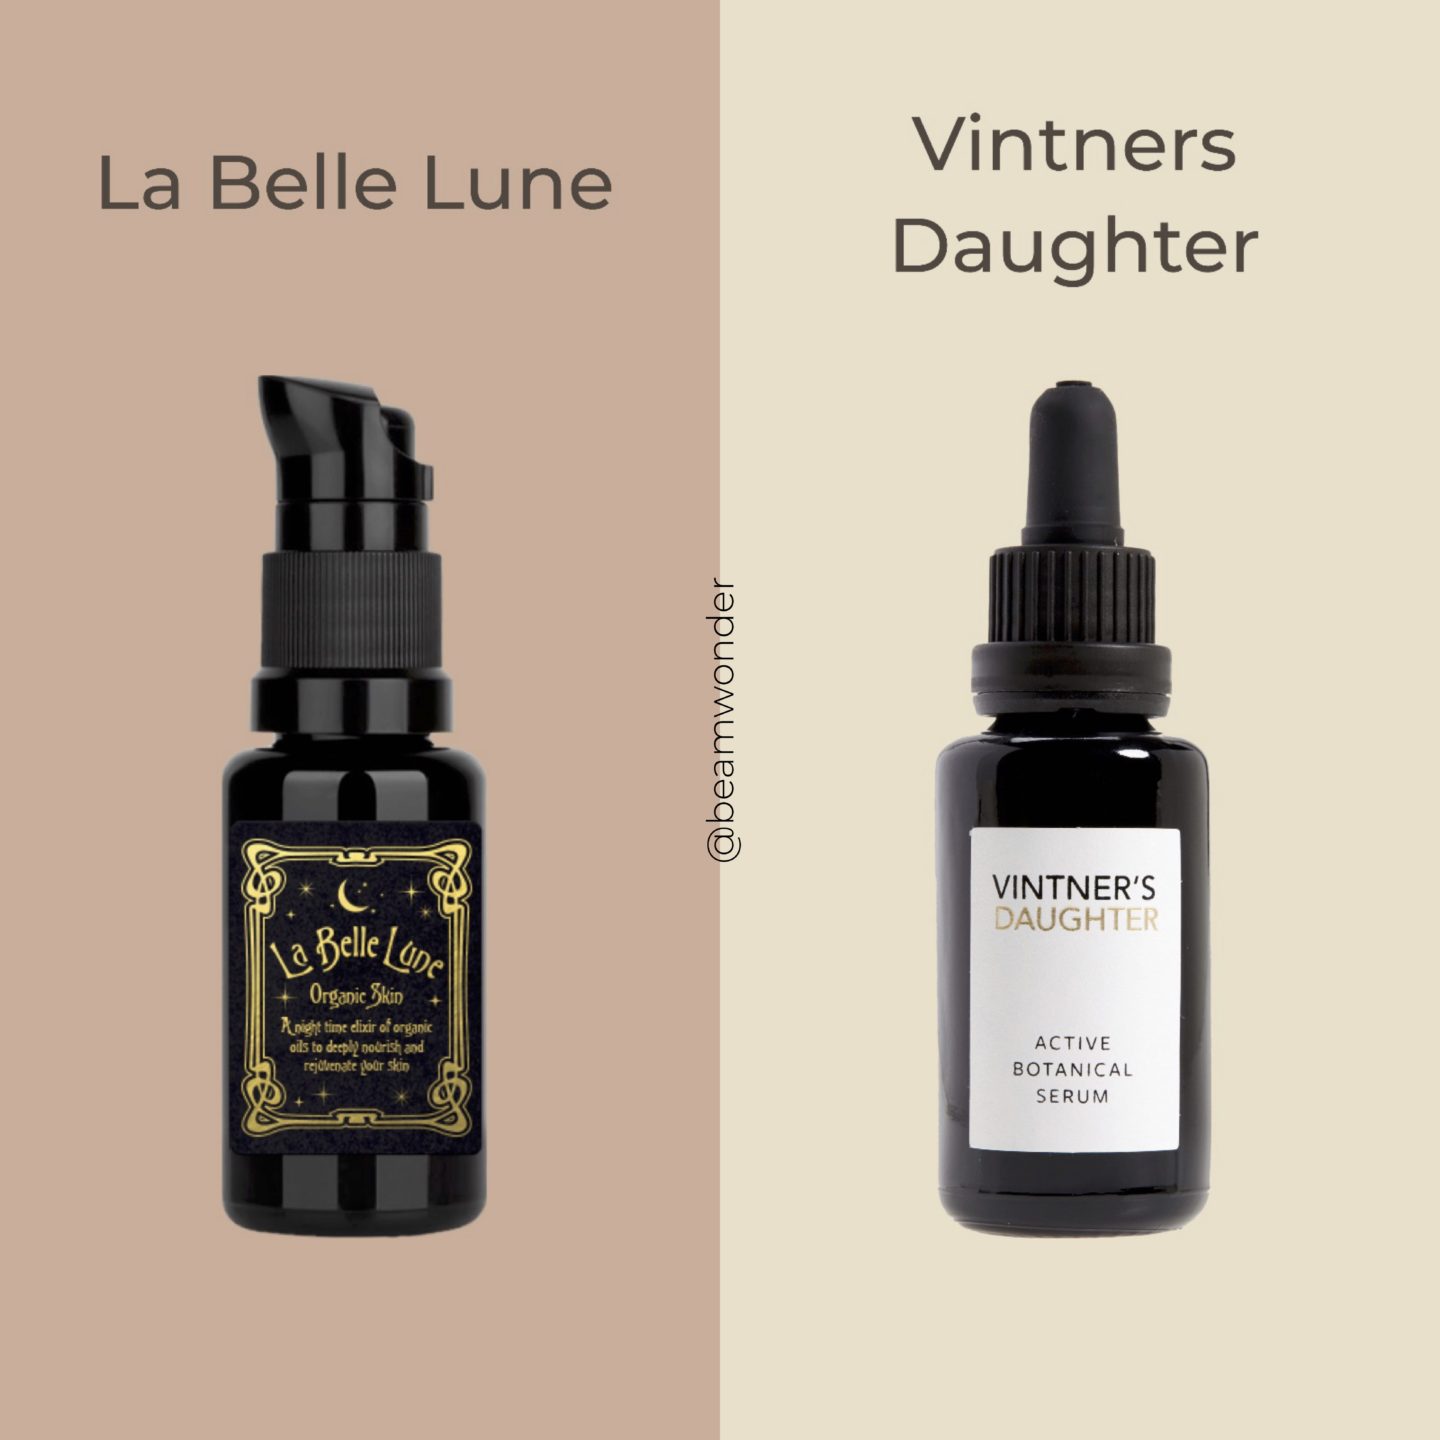 Some of you will know that when visiting the @contentbeauty last year I was super curious about @la_bellelune after seeing it on the shelf together with the uber luxe @vintnersdaughter . Being the “Curious George” that I am I really wanted to see how they would both compare against each other. 